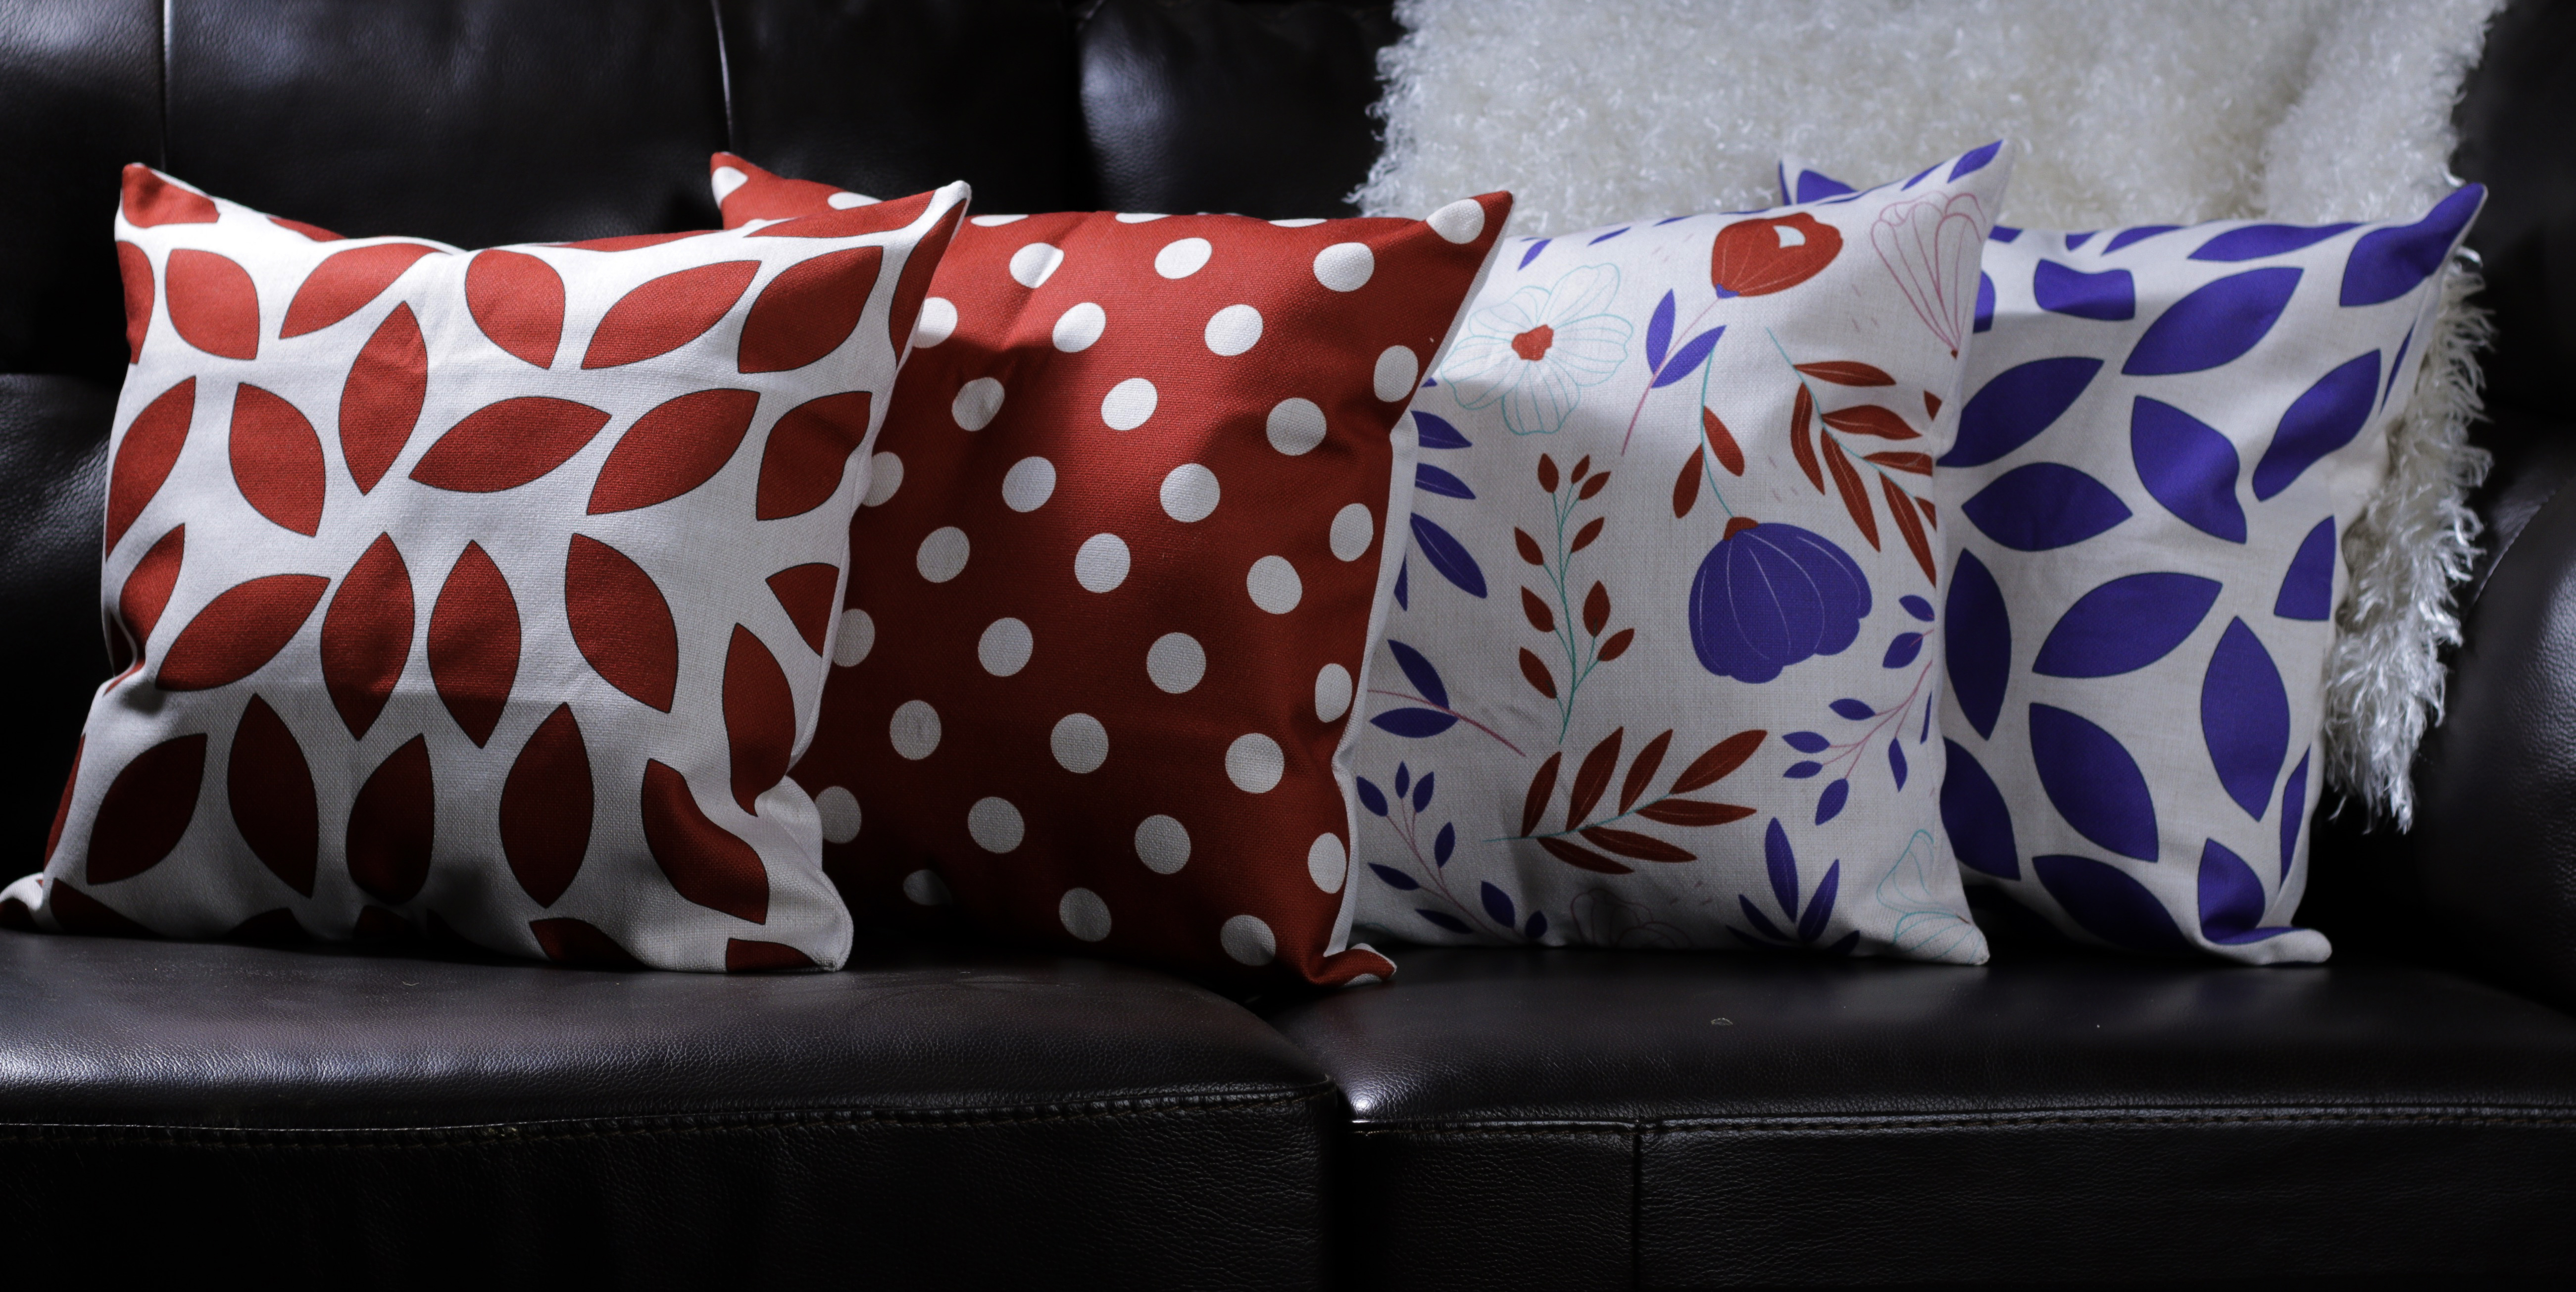 Red/Burgundy Polka Dot Decorative Throw Pillow Cover